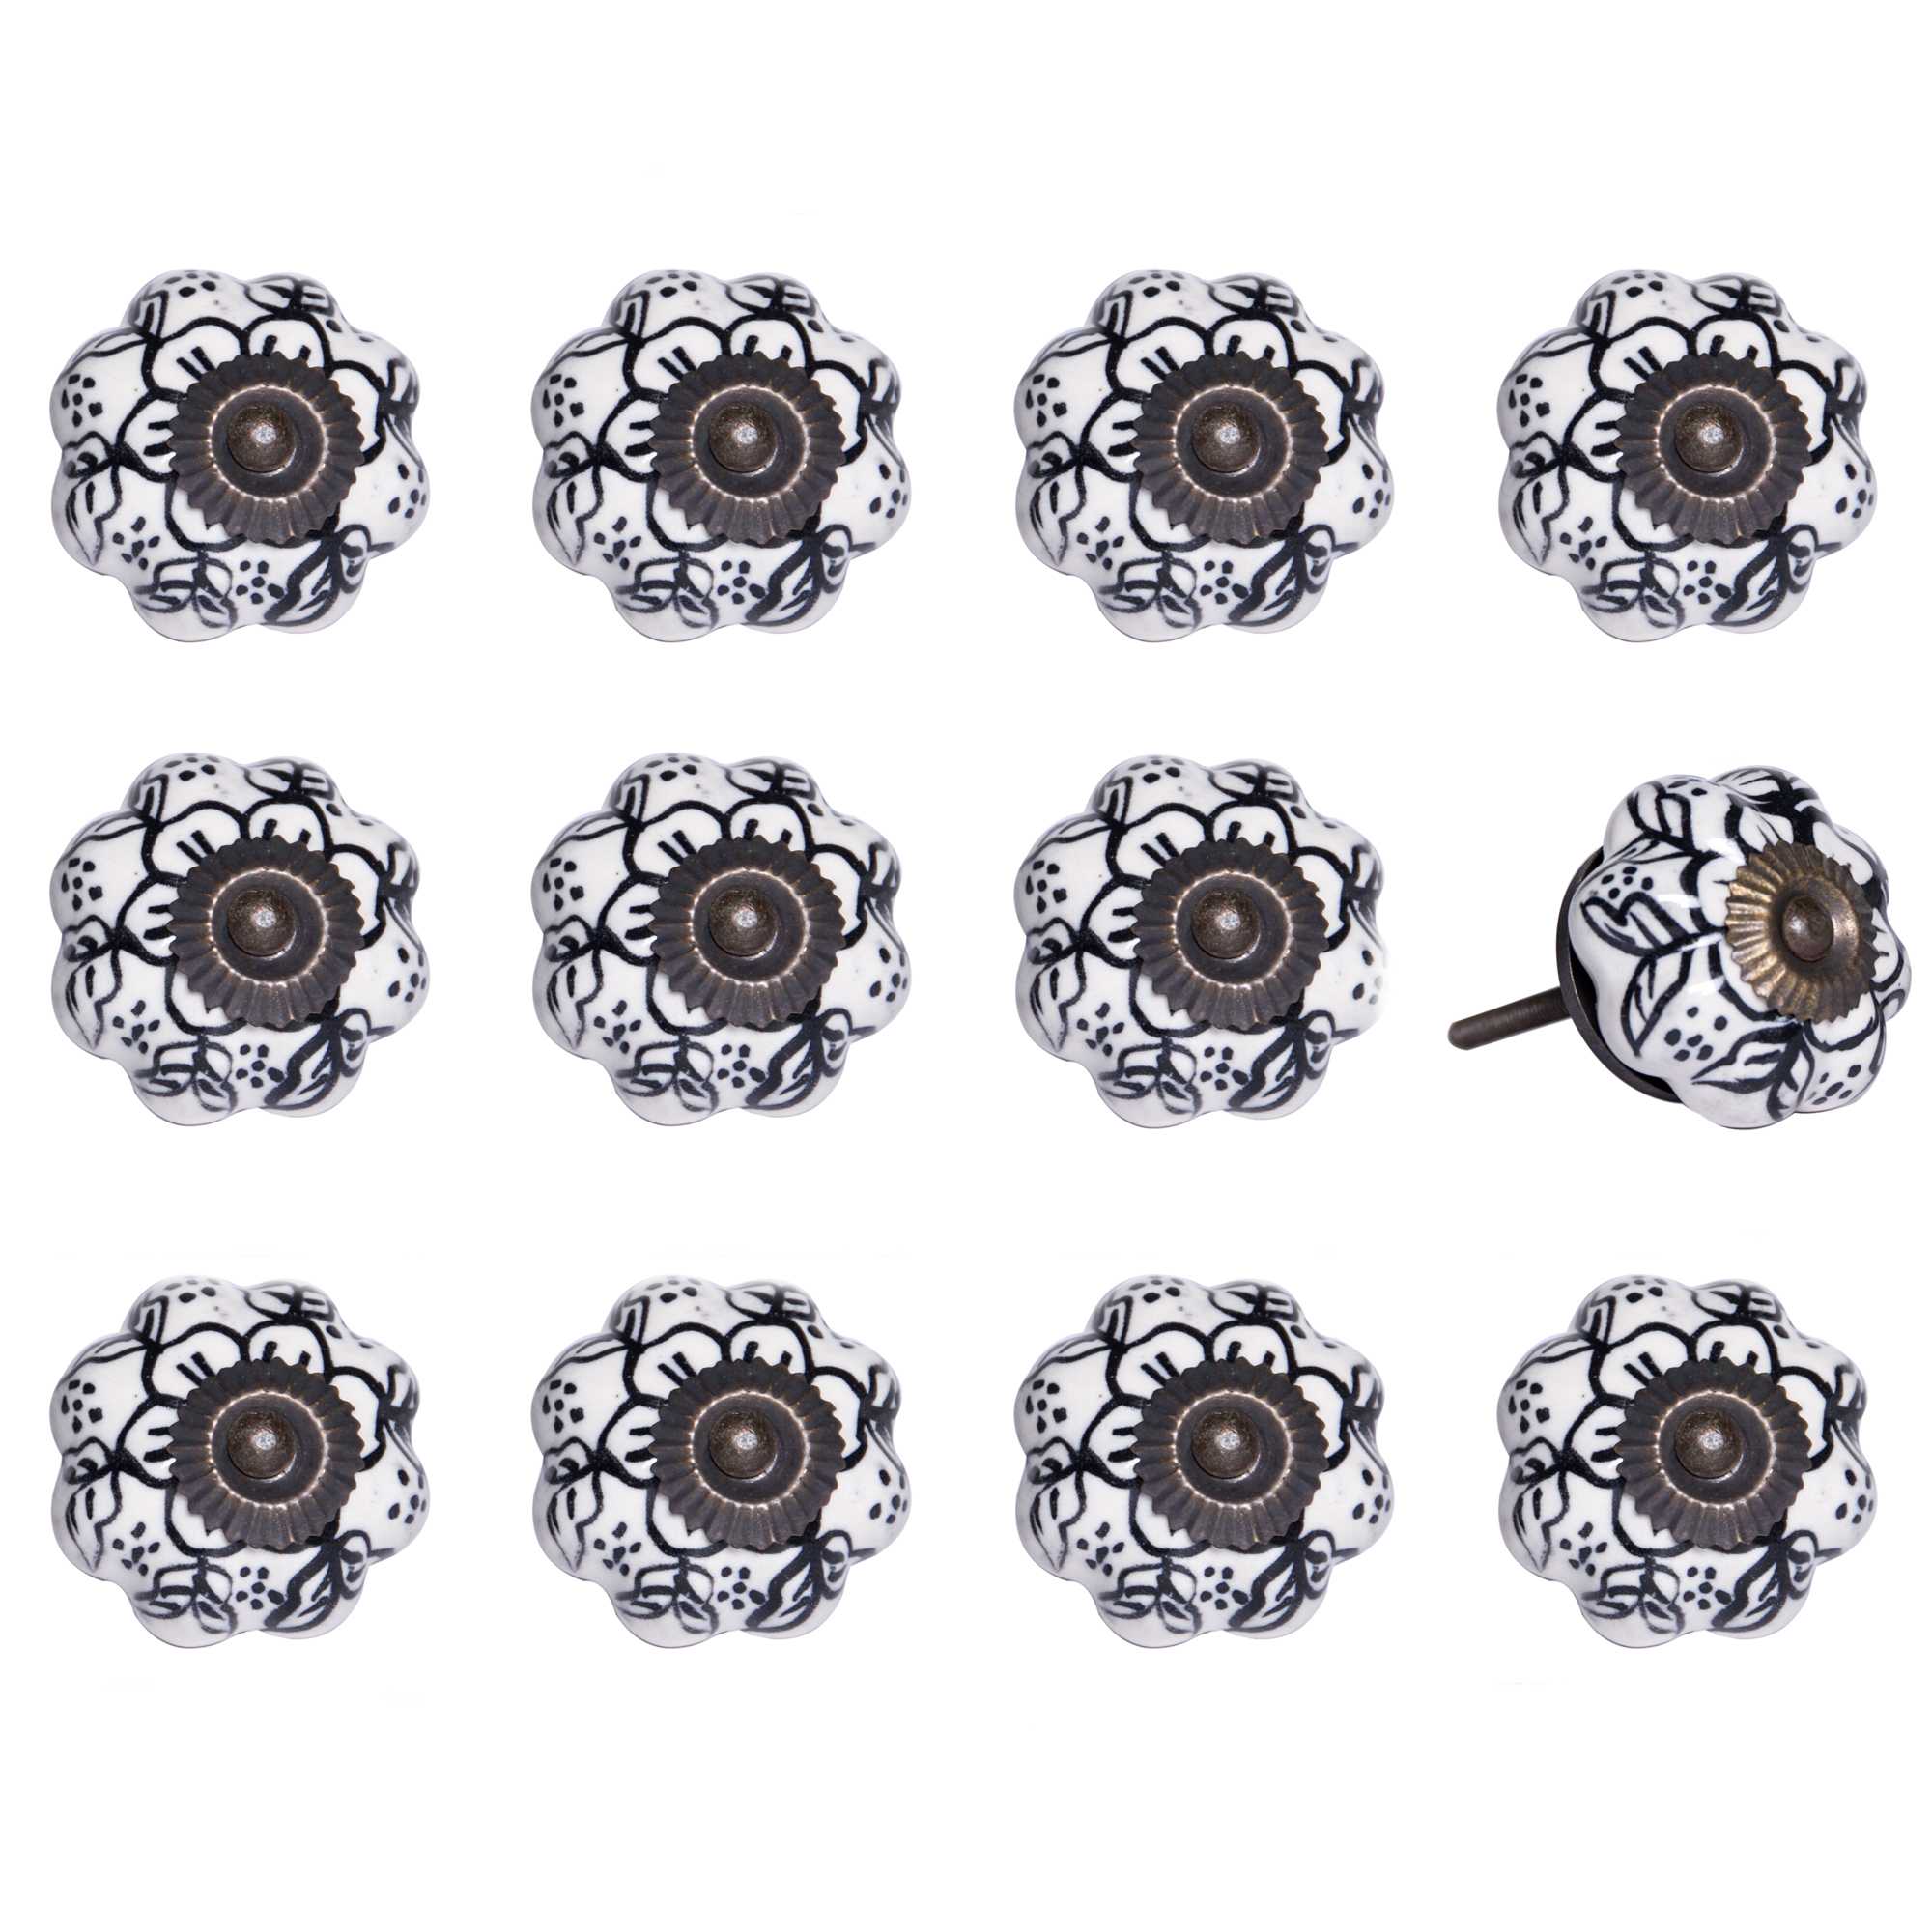 1.5" x 1.5" x 1.5" White, Black and Gold - Knobs 12-Pack